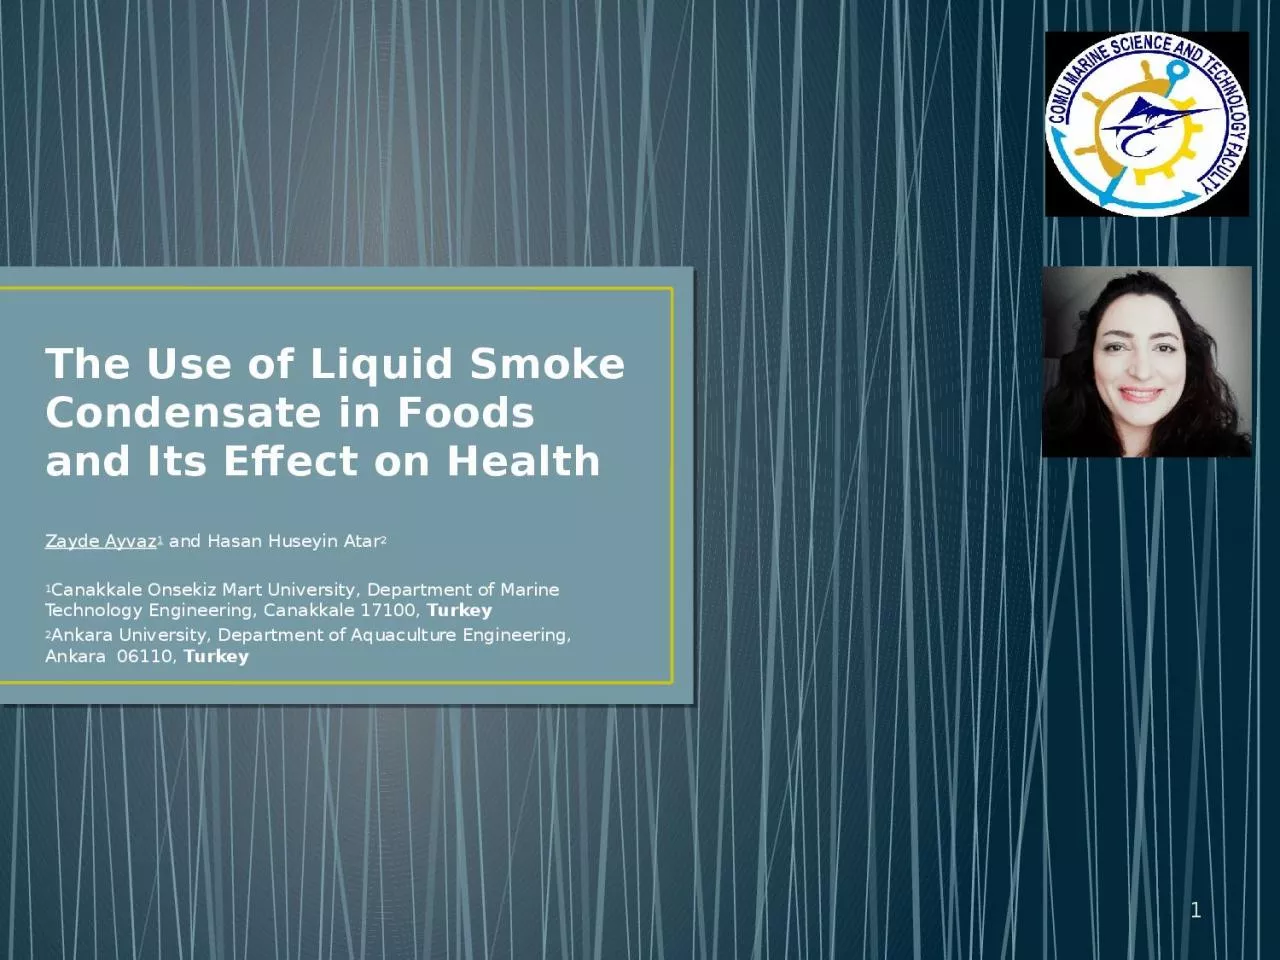 The Use of Liquid Smoke Condensate in Foods and Its Effect on Health